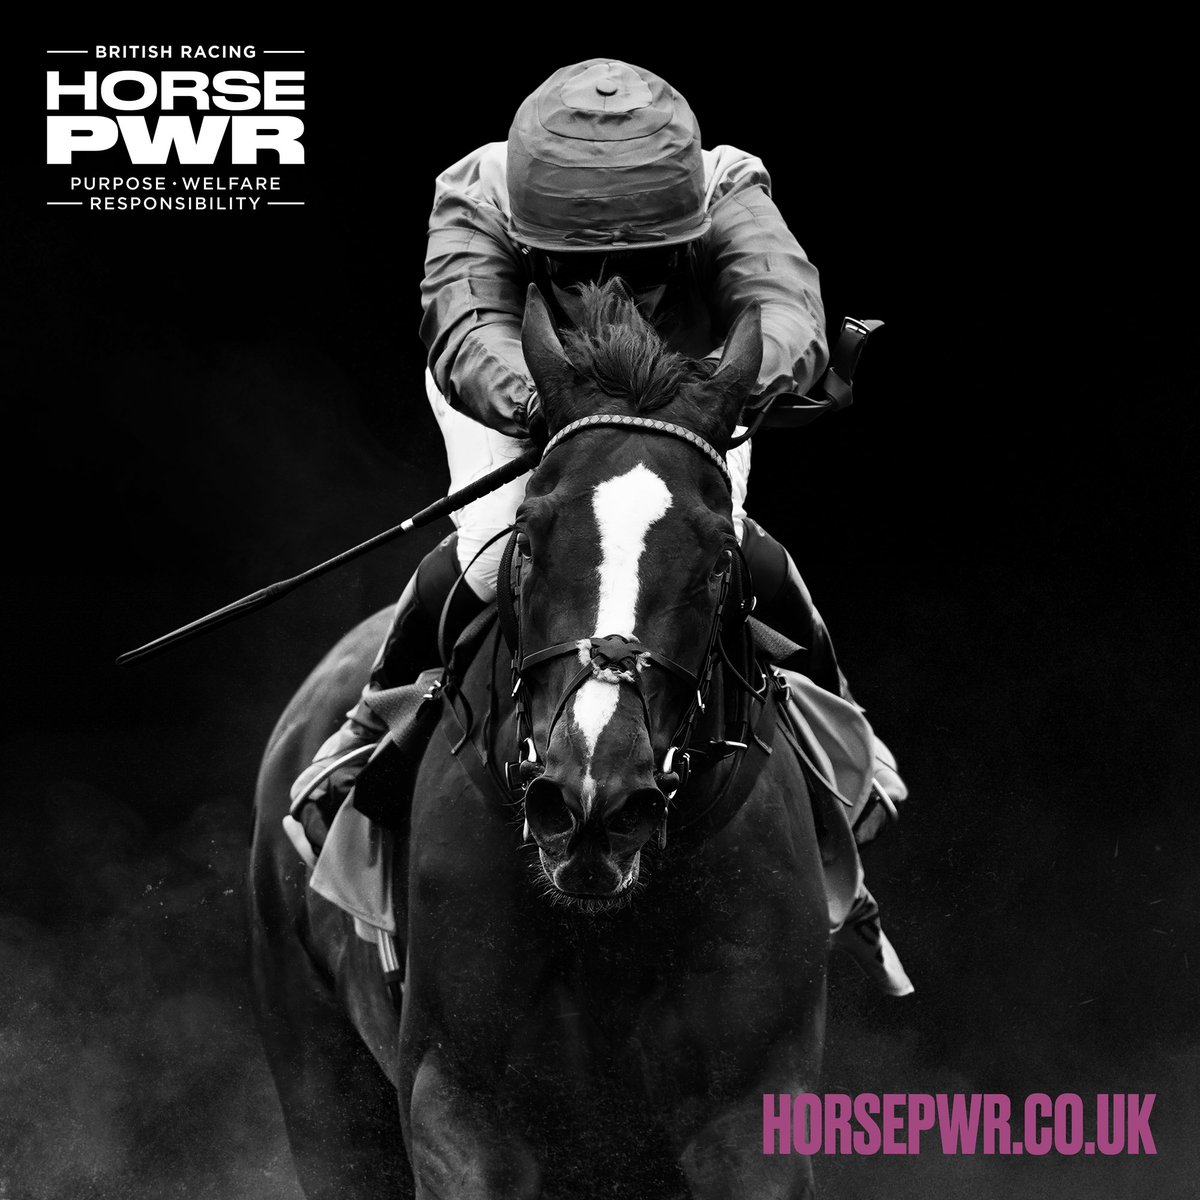 'This is just the start. Public trust in racing cannot be taken for granted; we have to continue to earn that trust.' The BHA's Head of Communications, and @WelfareBoard member Robin Mounsey talks about the launch of and the ambitions to take the #HorsePWR campaign to wider